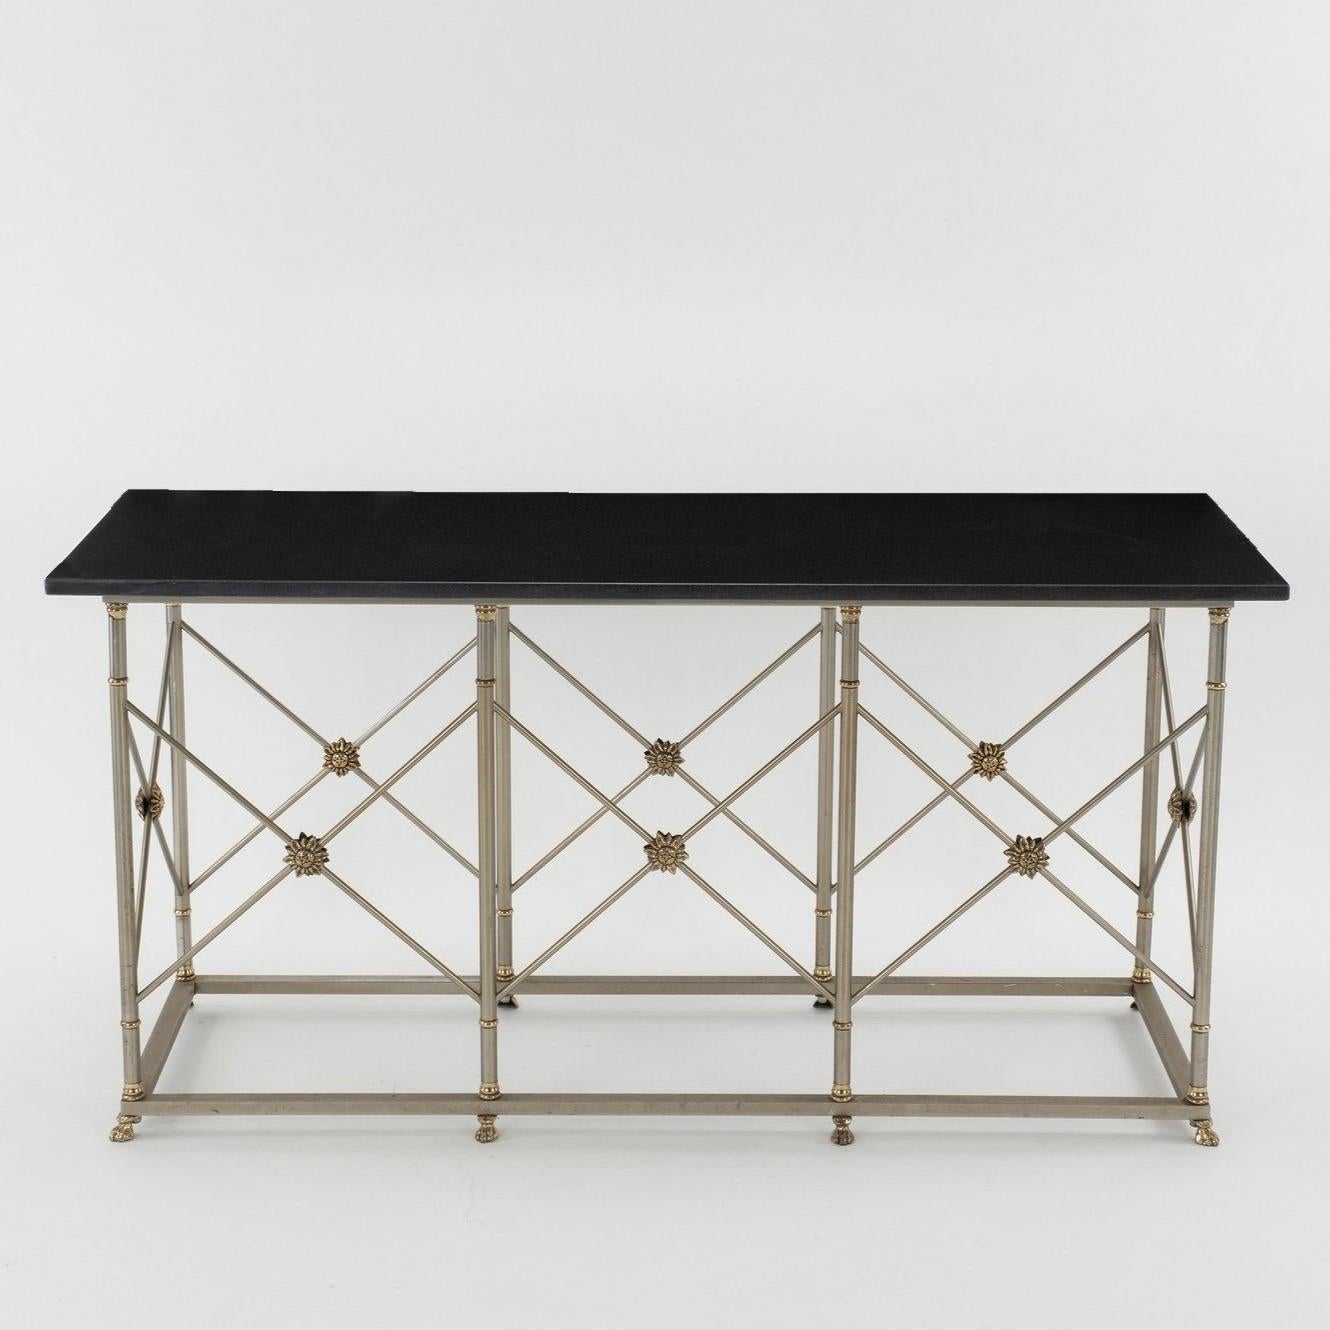 20th Century Jansen style console. Each oversized stately table features polished steel, brass rosettes and lions paw feet supporting a black granite top. Two available, sold individually.